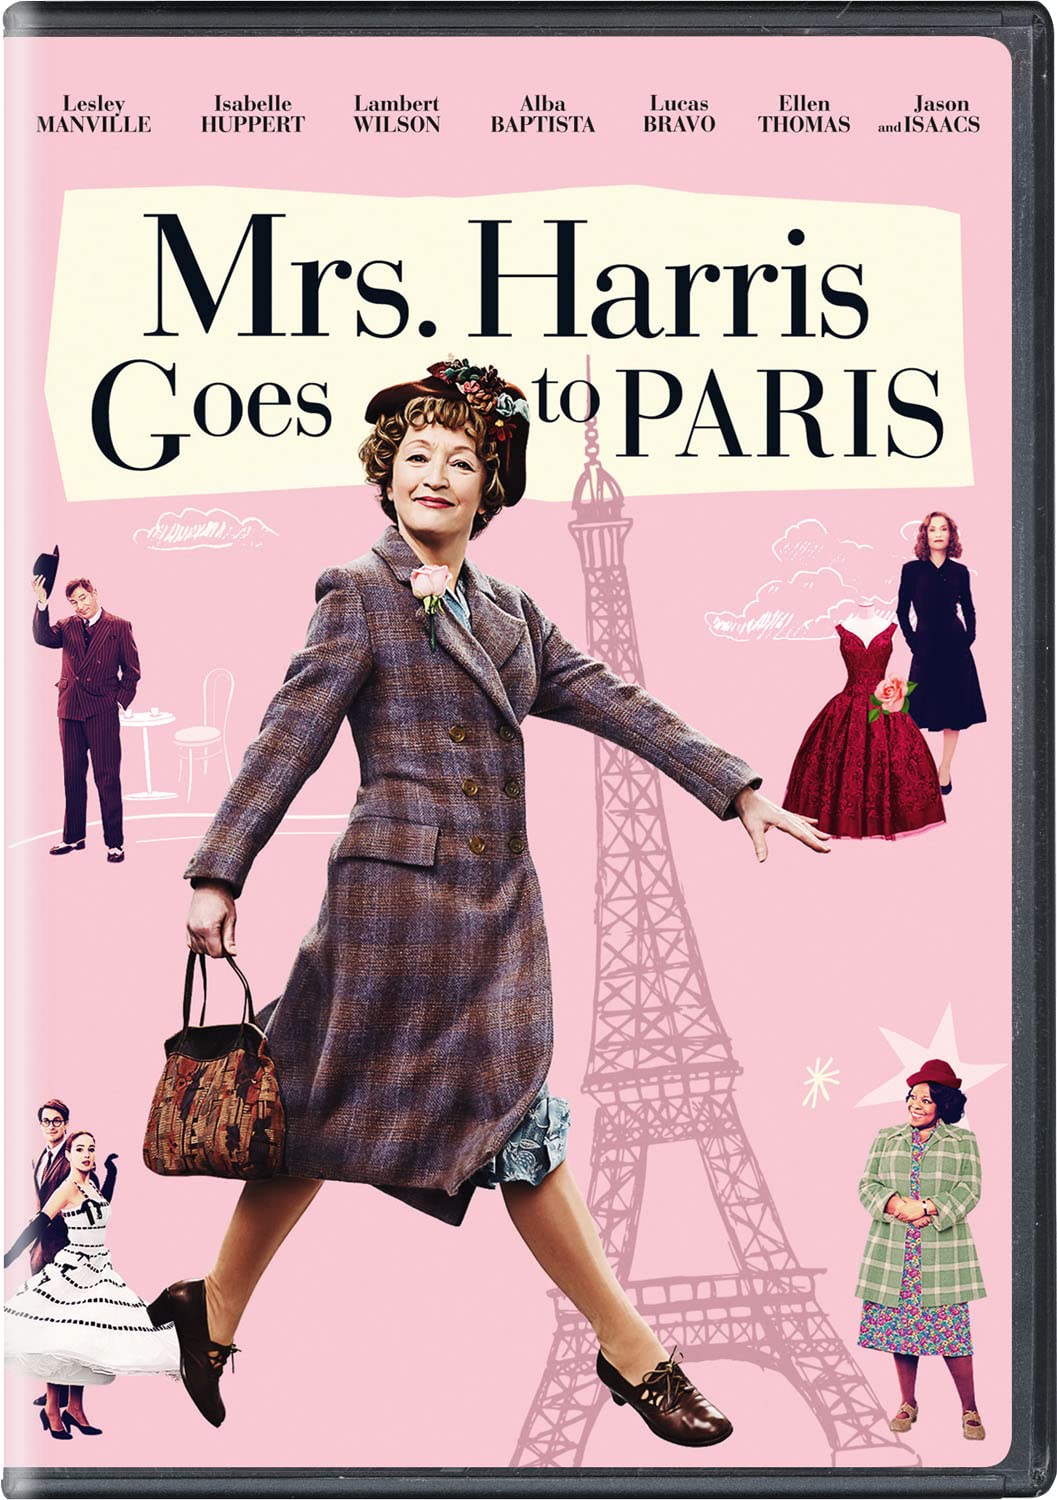 Image for "Mrs. Harris goes to Paris"